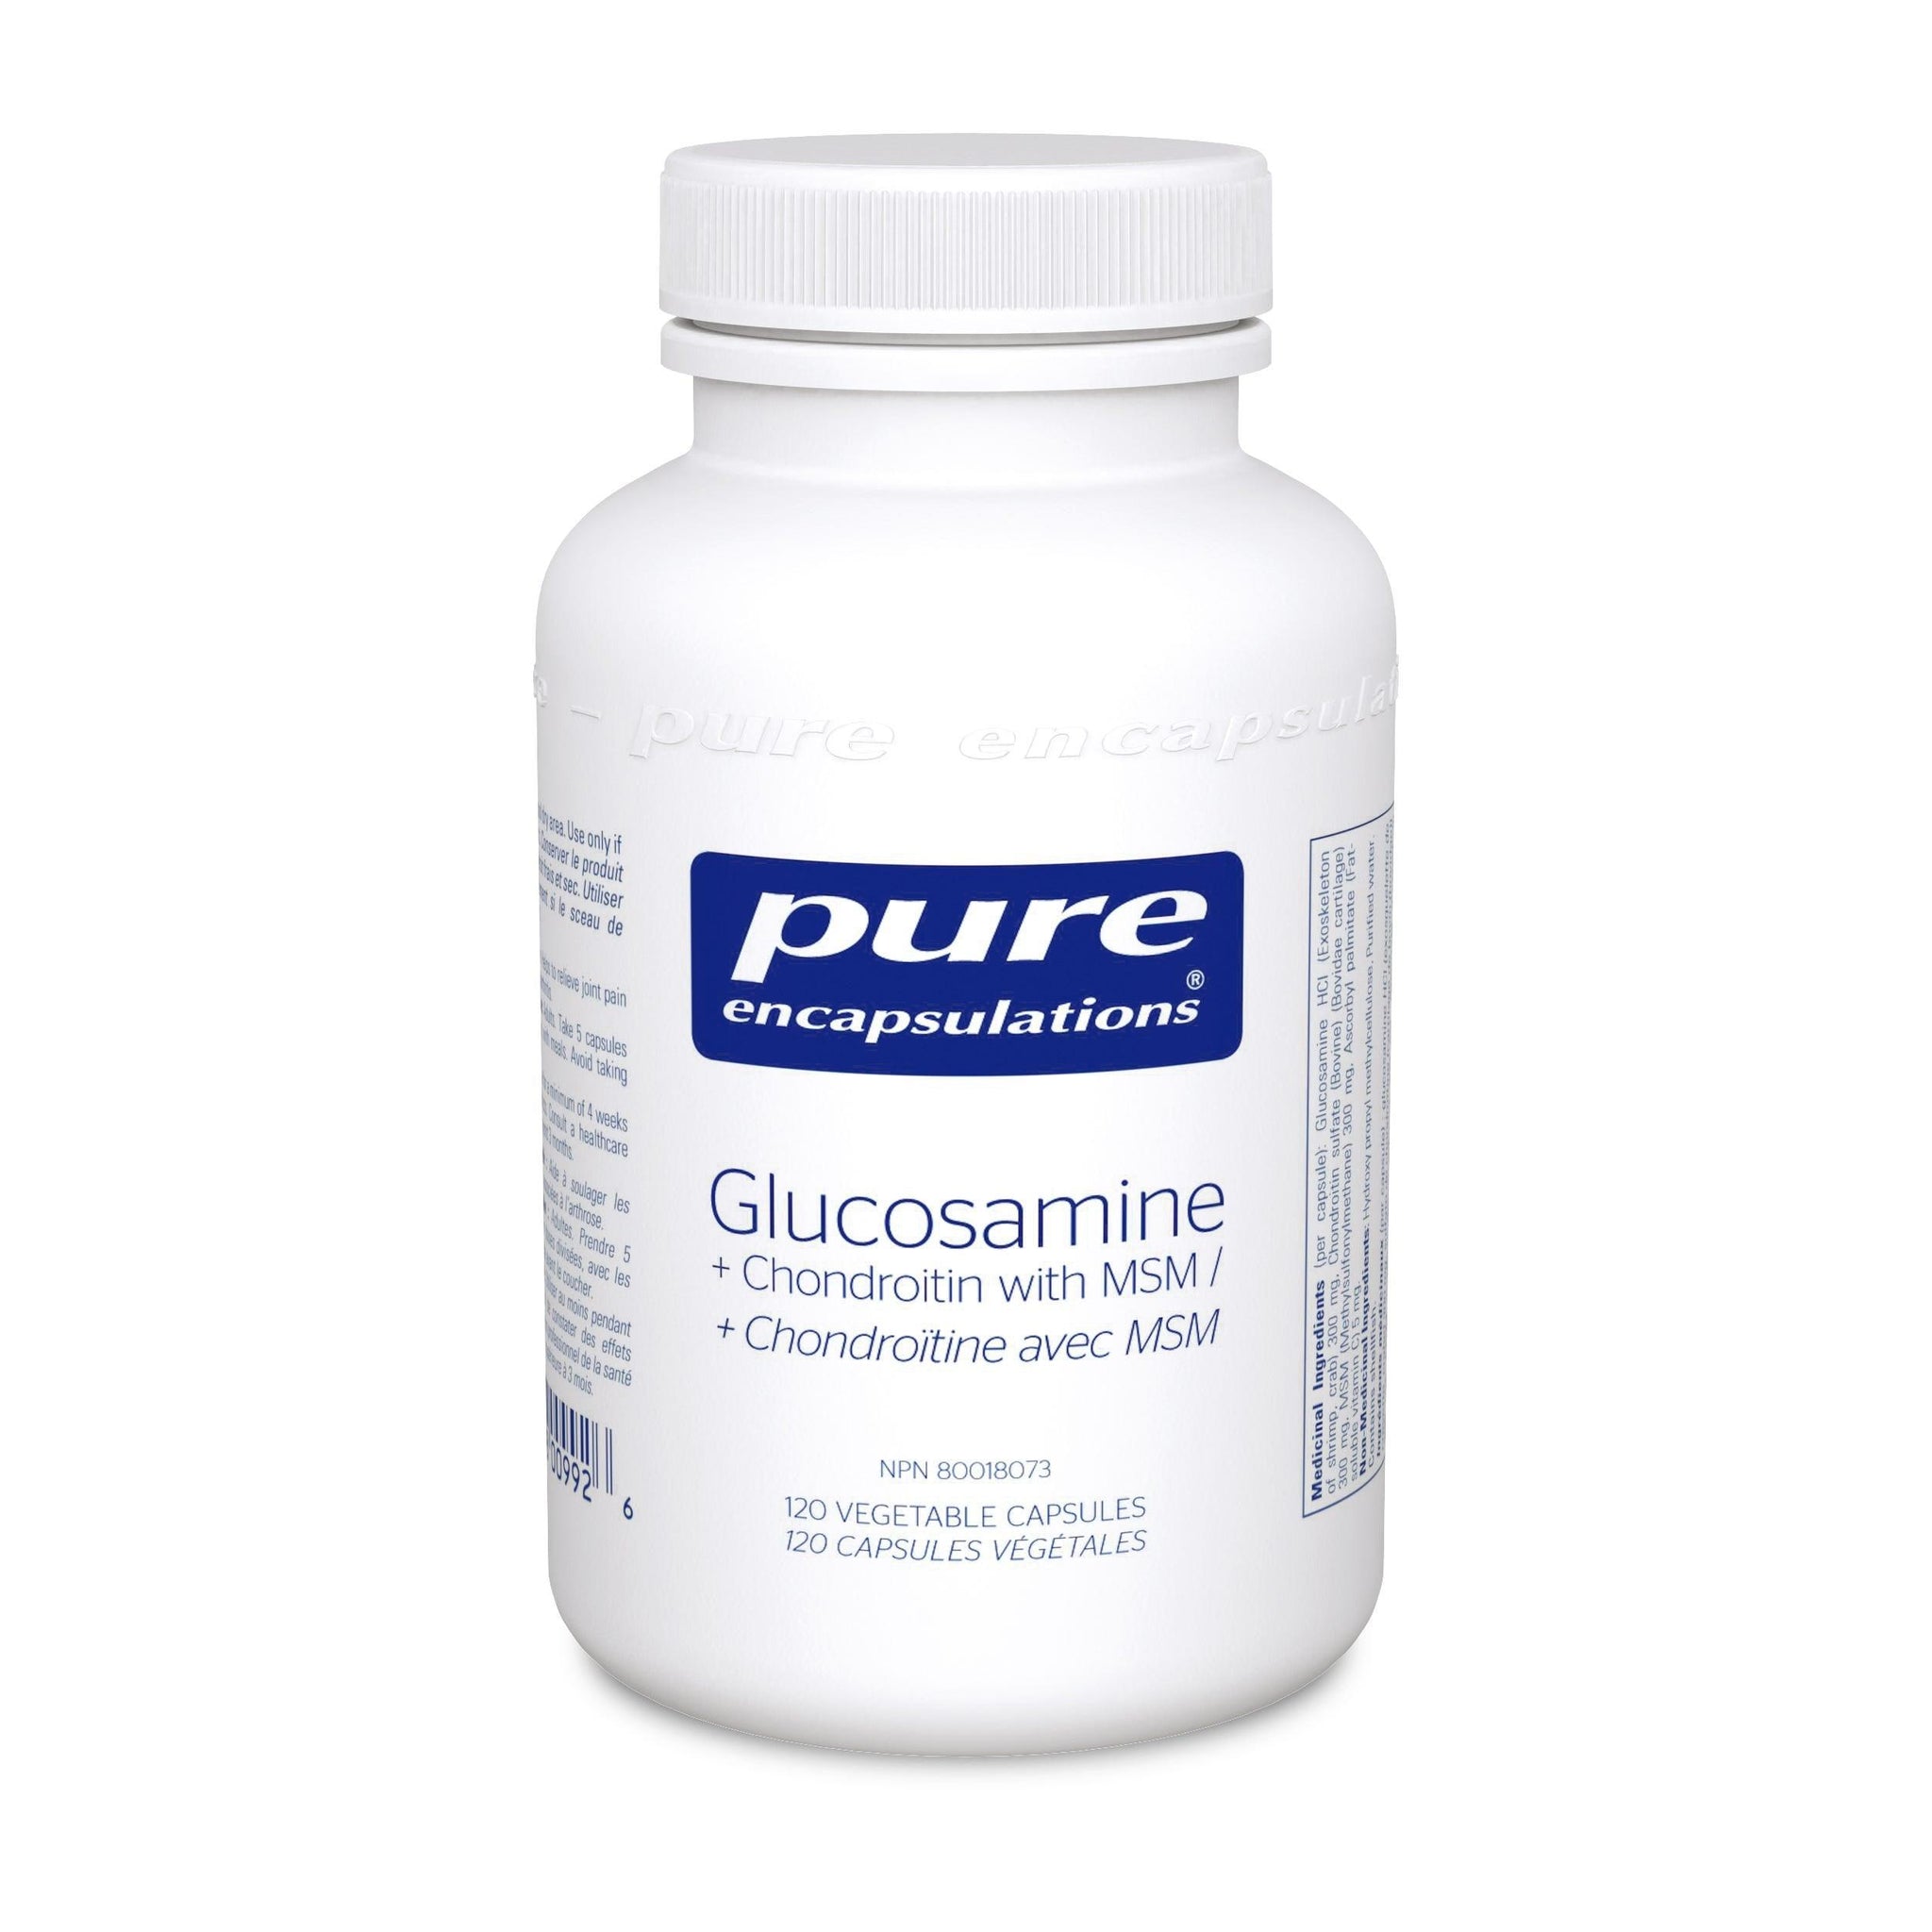 Pure Encapsulations Glucosamine + Chondroitin with MSM - 120 Capsules